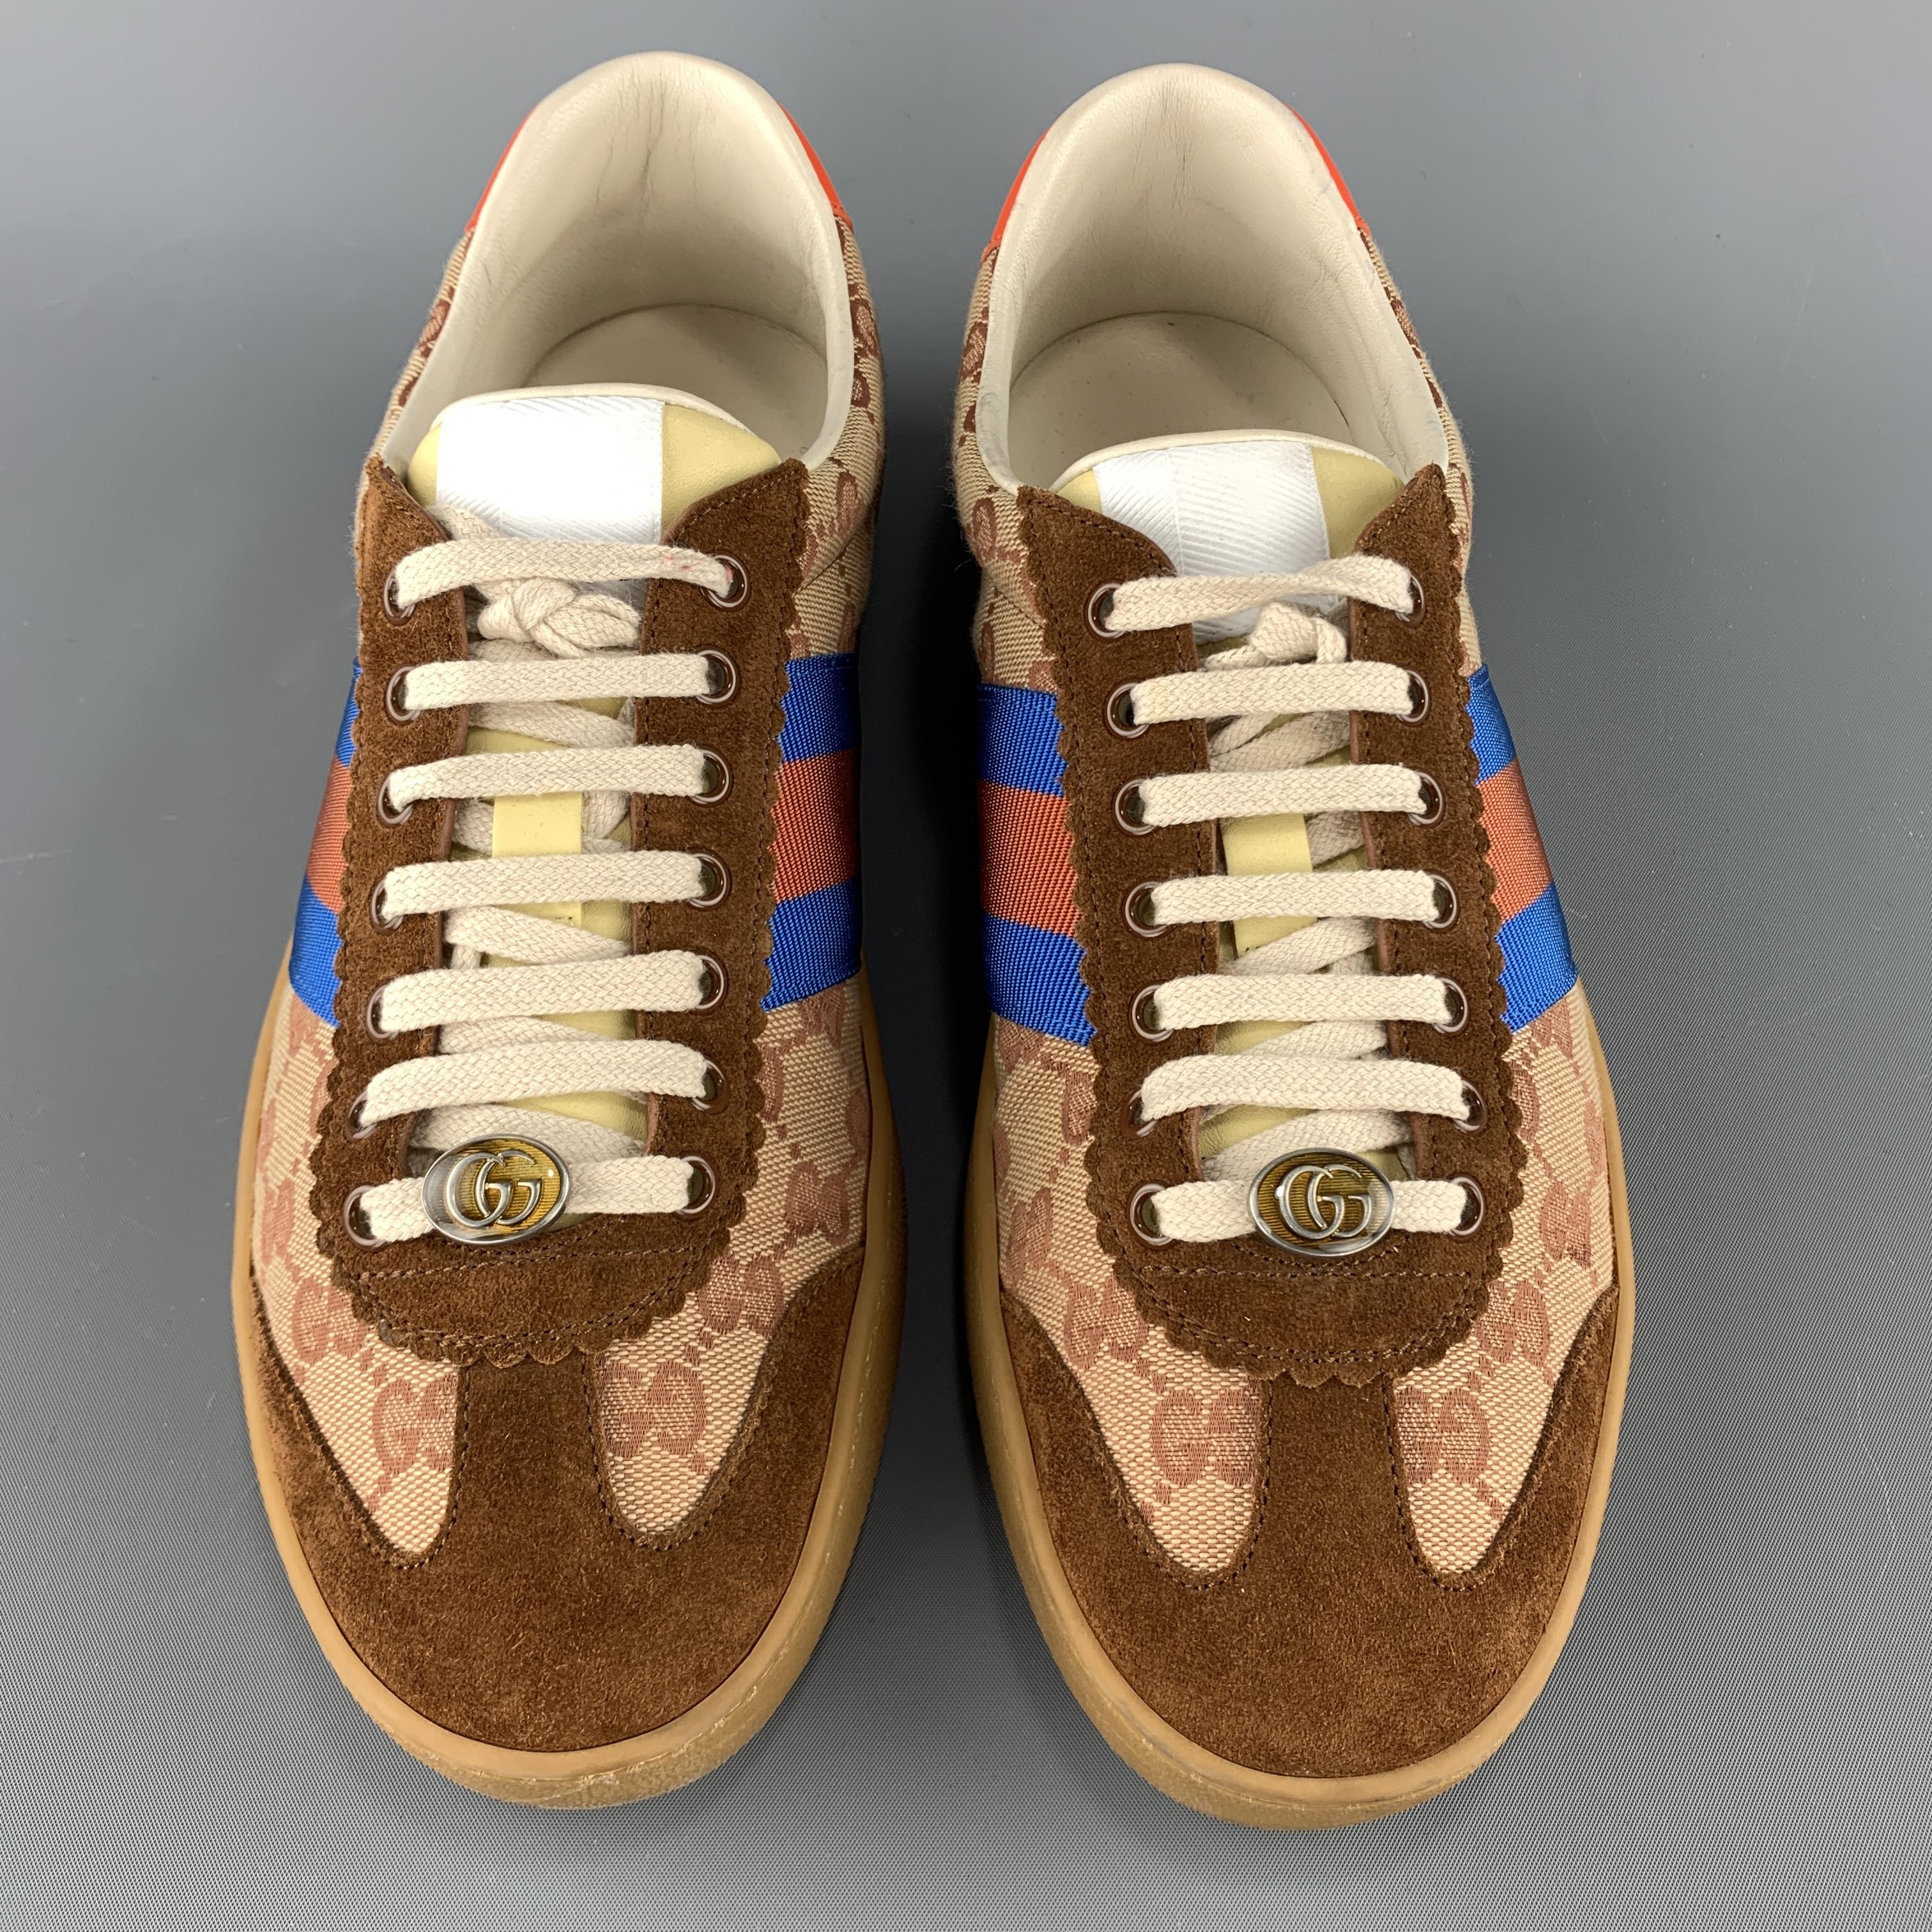 GUCCI G74 low top sneakers come in tan and beige monogram canvas with suede panels, lace up front with GG enamel accent, red leather heel with bee stamp, and tan rubber sole.  Made in Italy.

Excellent Pre-Owned Condition.
Marked: UK 8.5

Outsole: